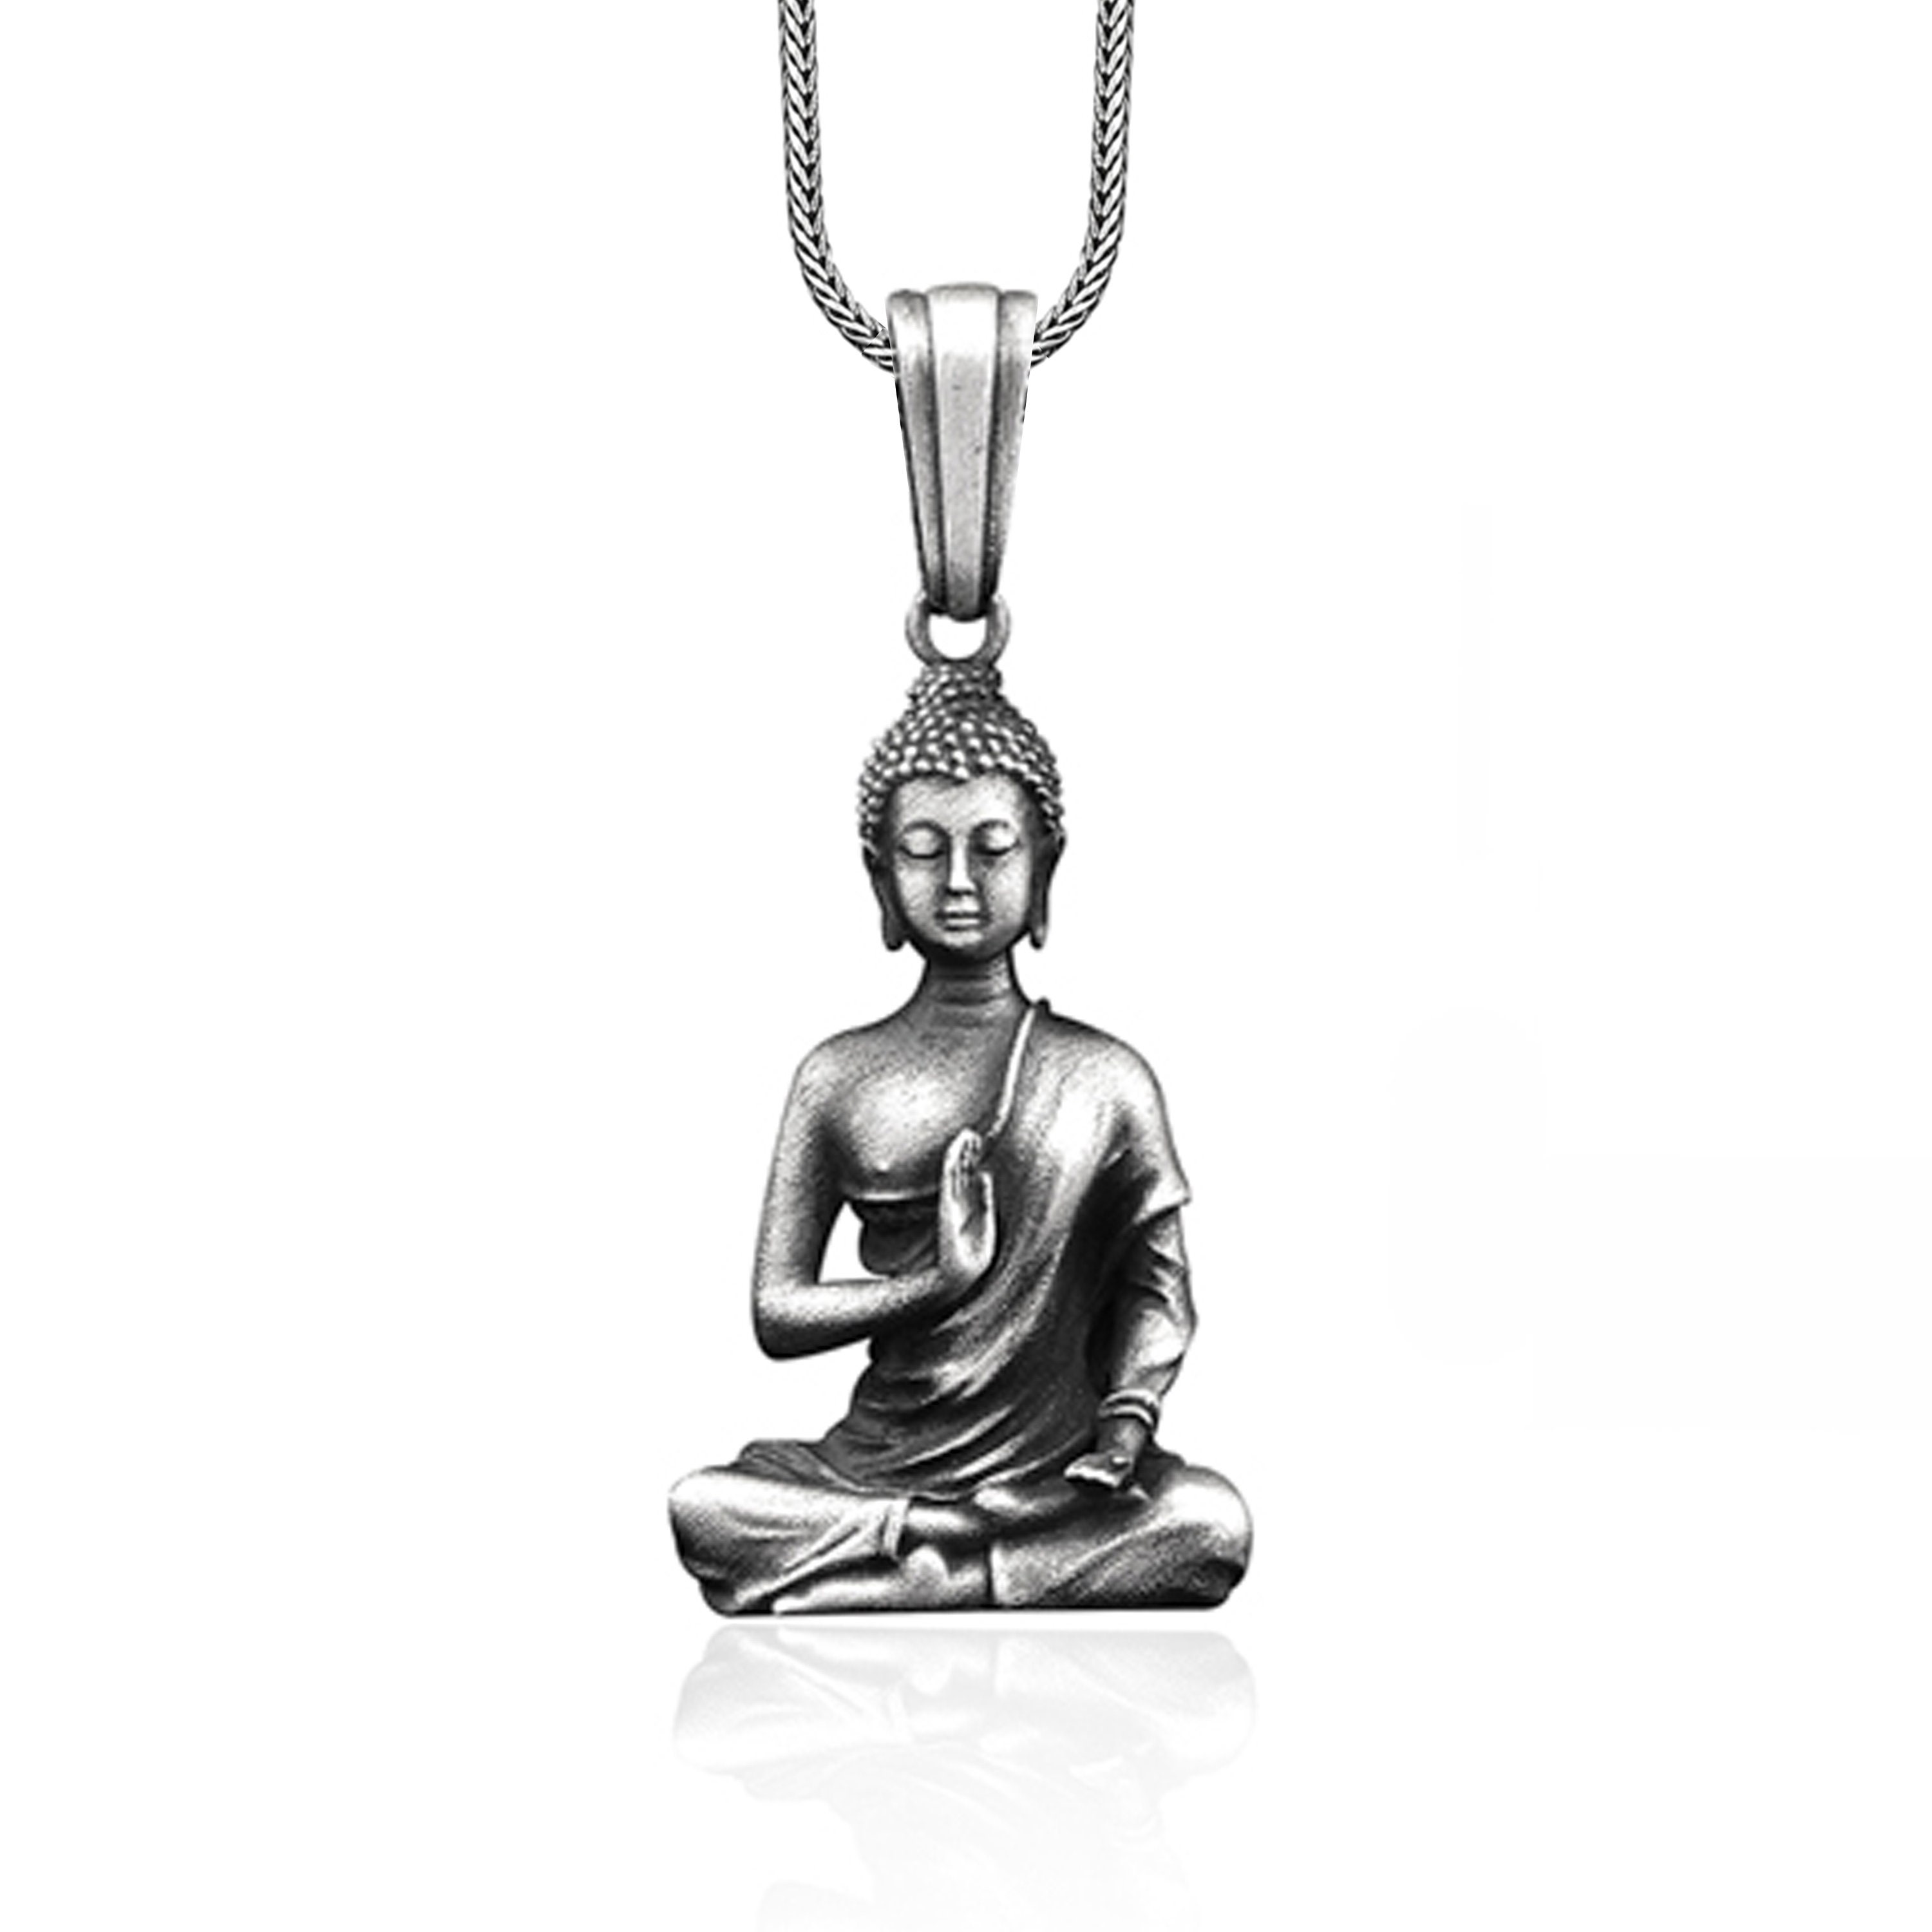 Buy Morir Gold Plated Brass Small Buddha Pendant Chain Necklaces Amulet  Religious Jewelry for Men Women Boys Online In India At Discounted Prices